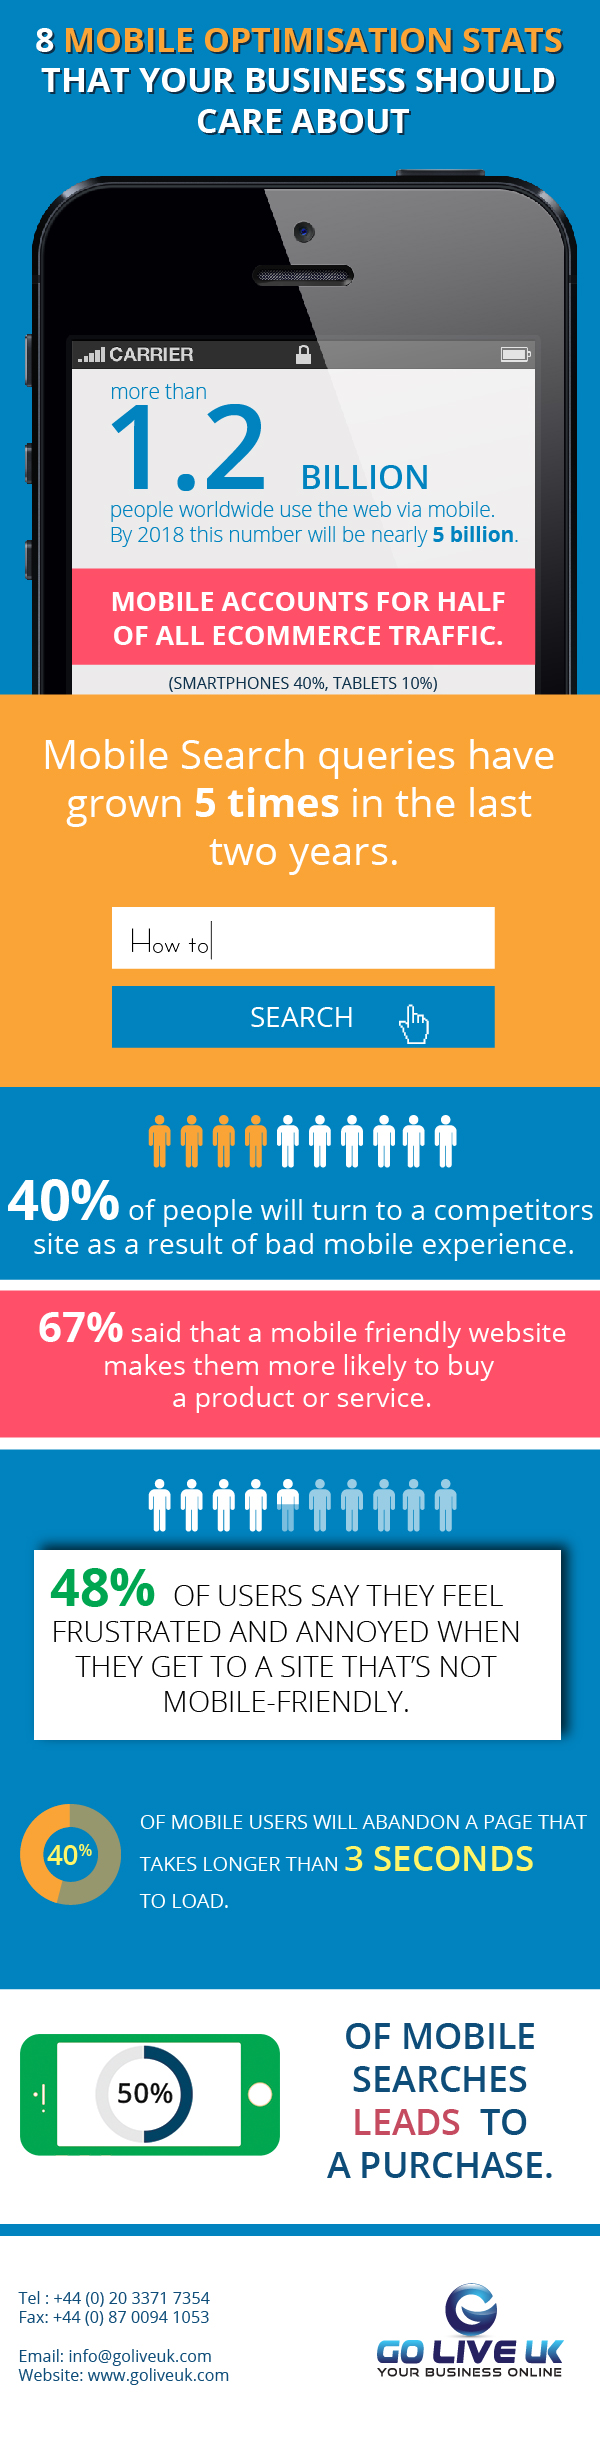 8 Mobile Optimisation Stats Your Business Should Care About